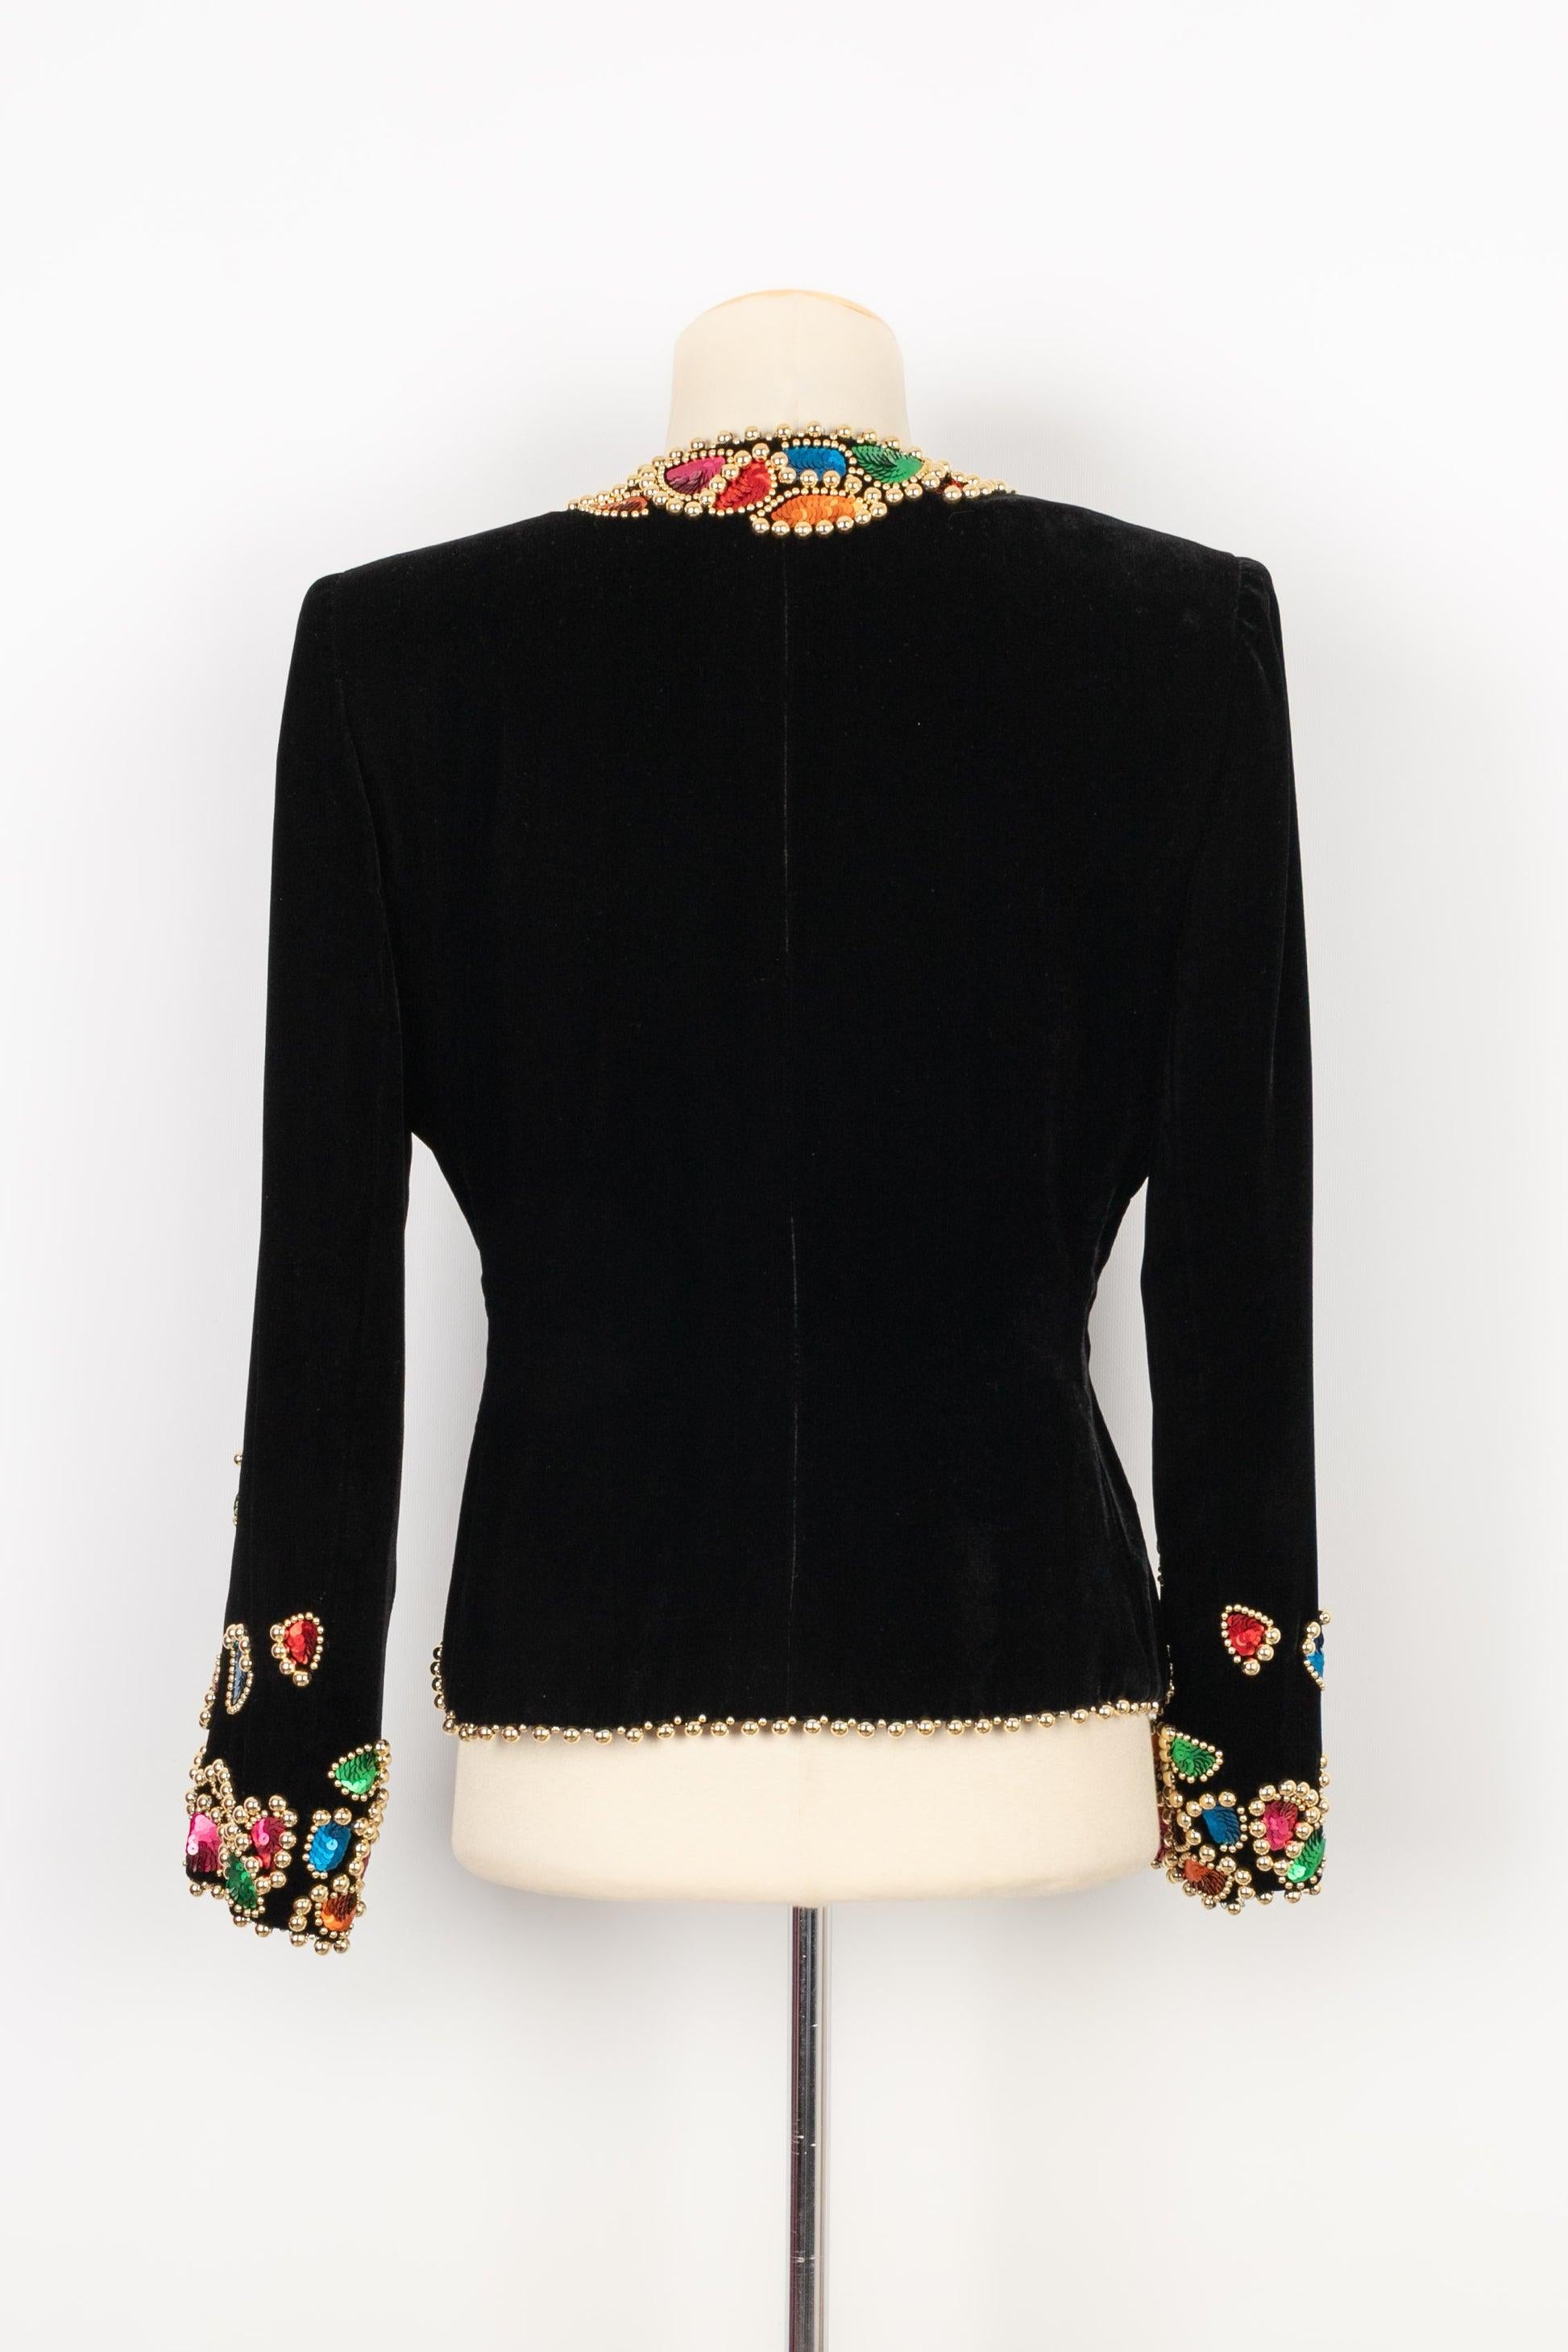 Givenchy Set Composed of Jacket Highly Embroidered Jumpsuit, circa 1980 1